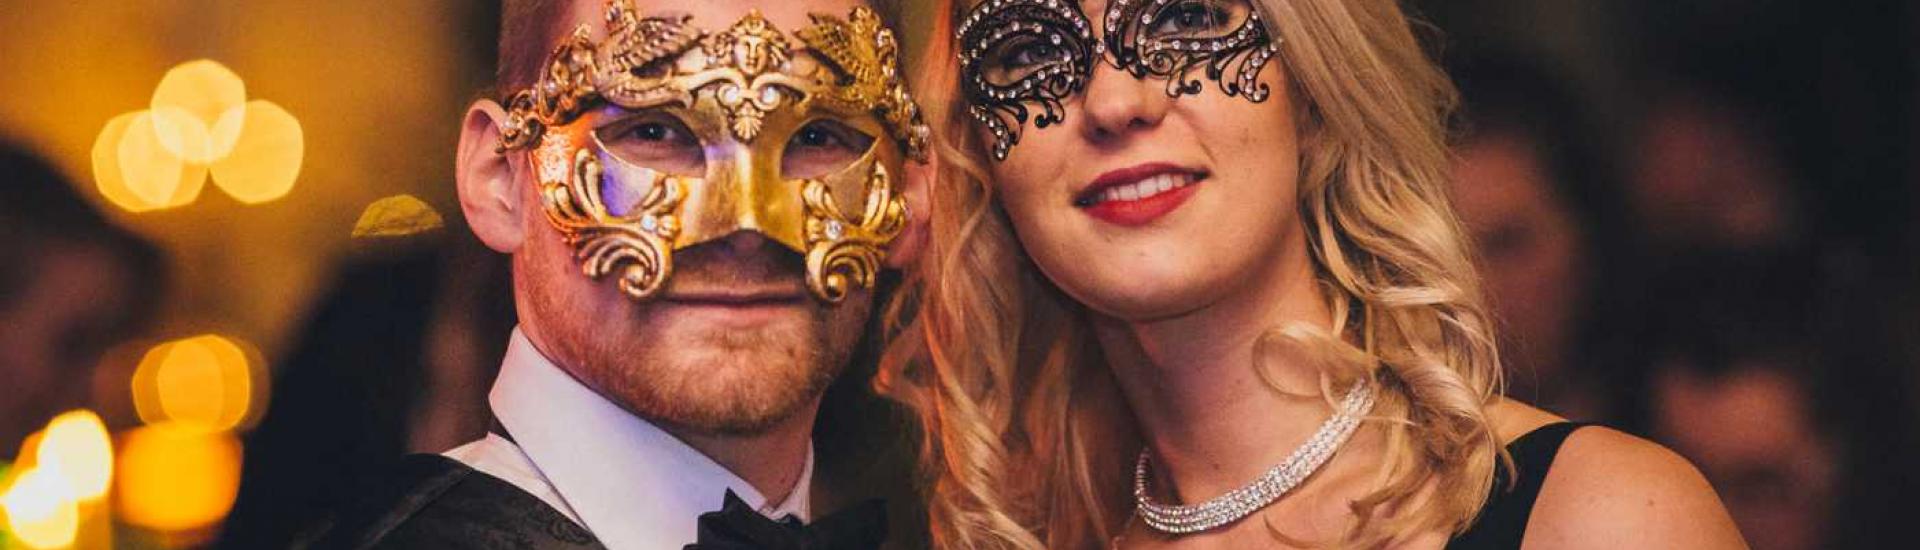 Masked couple at Christmas party